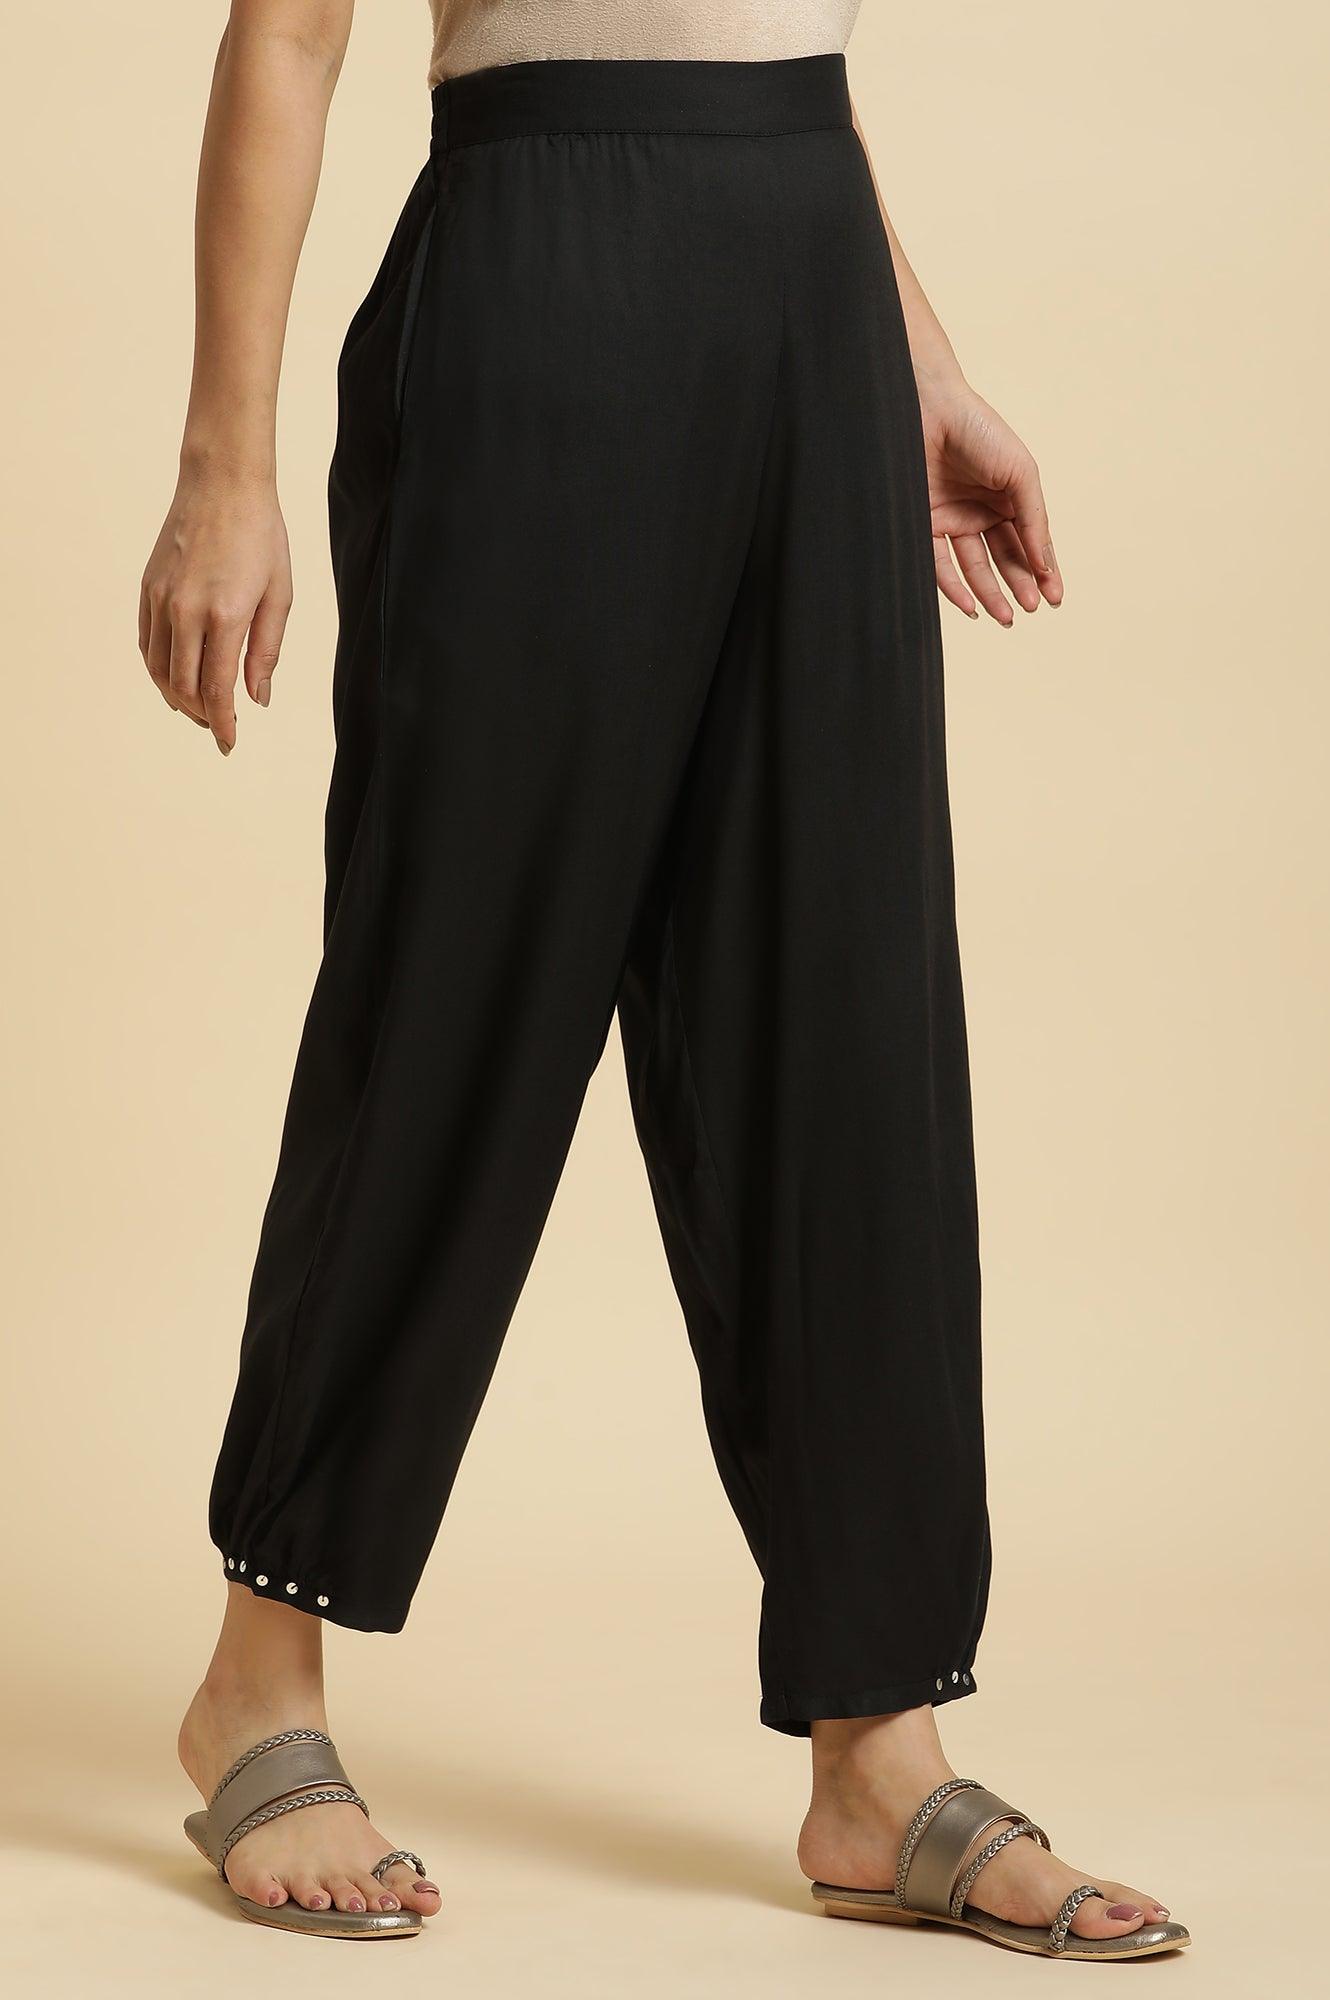 Black Side Gather Pants With Sequin Details - wforwoman